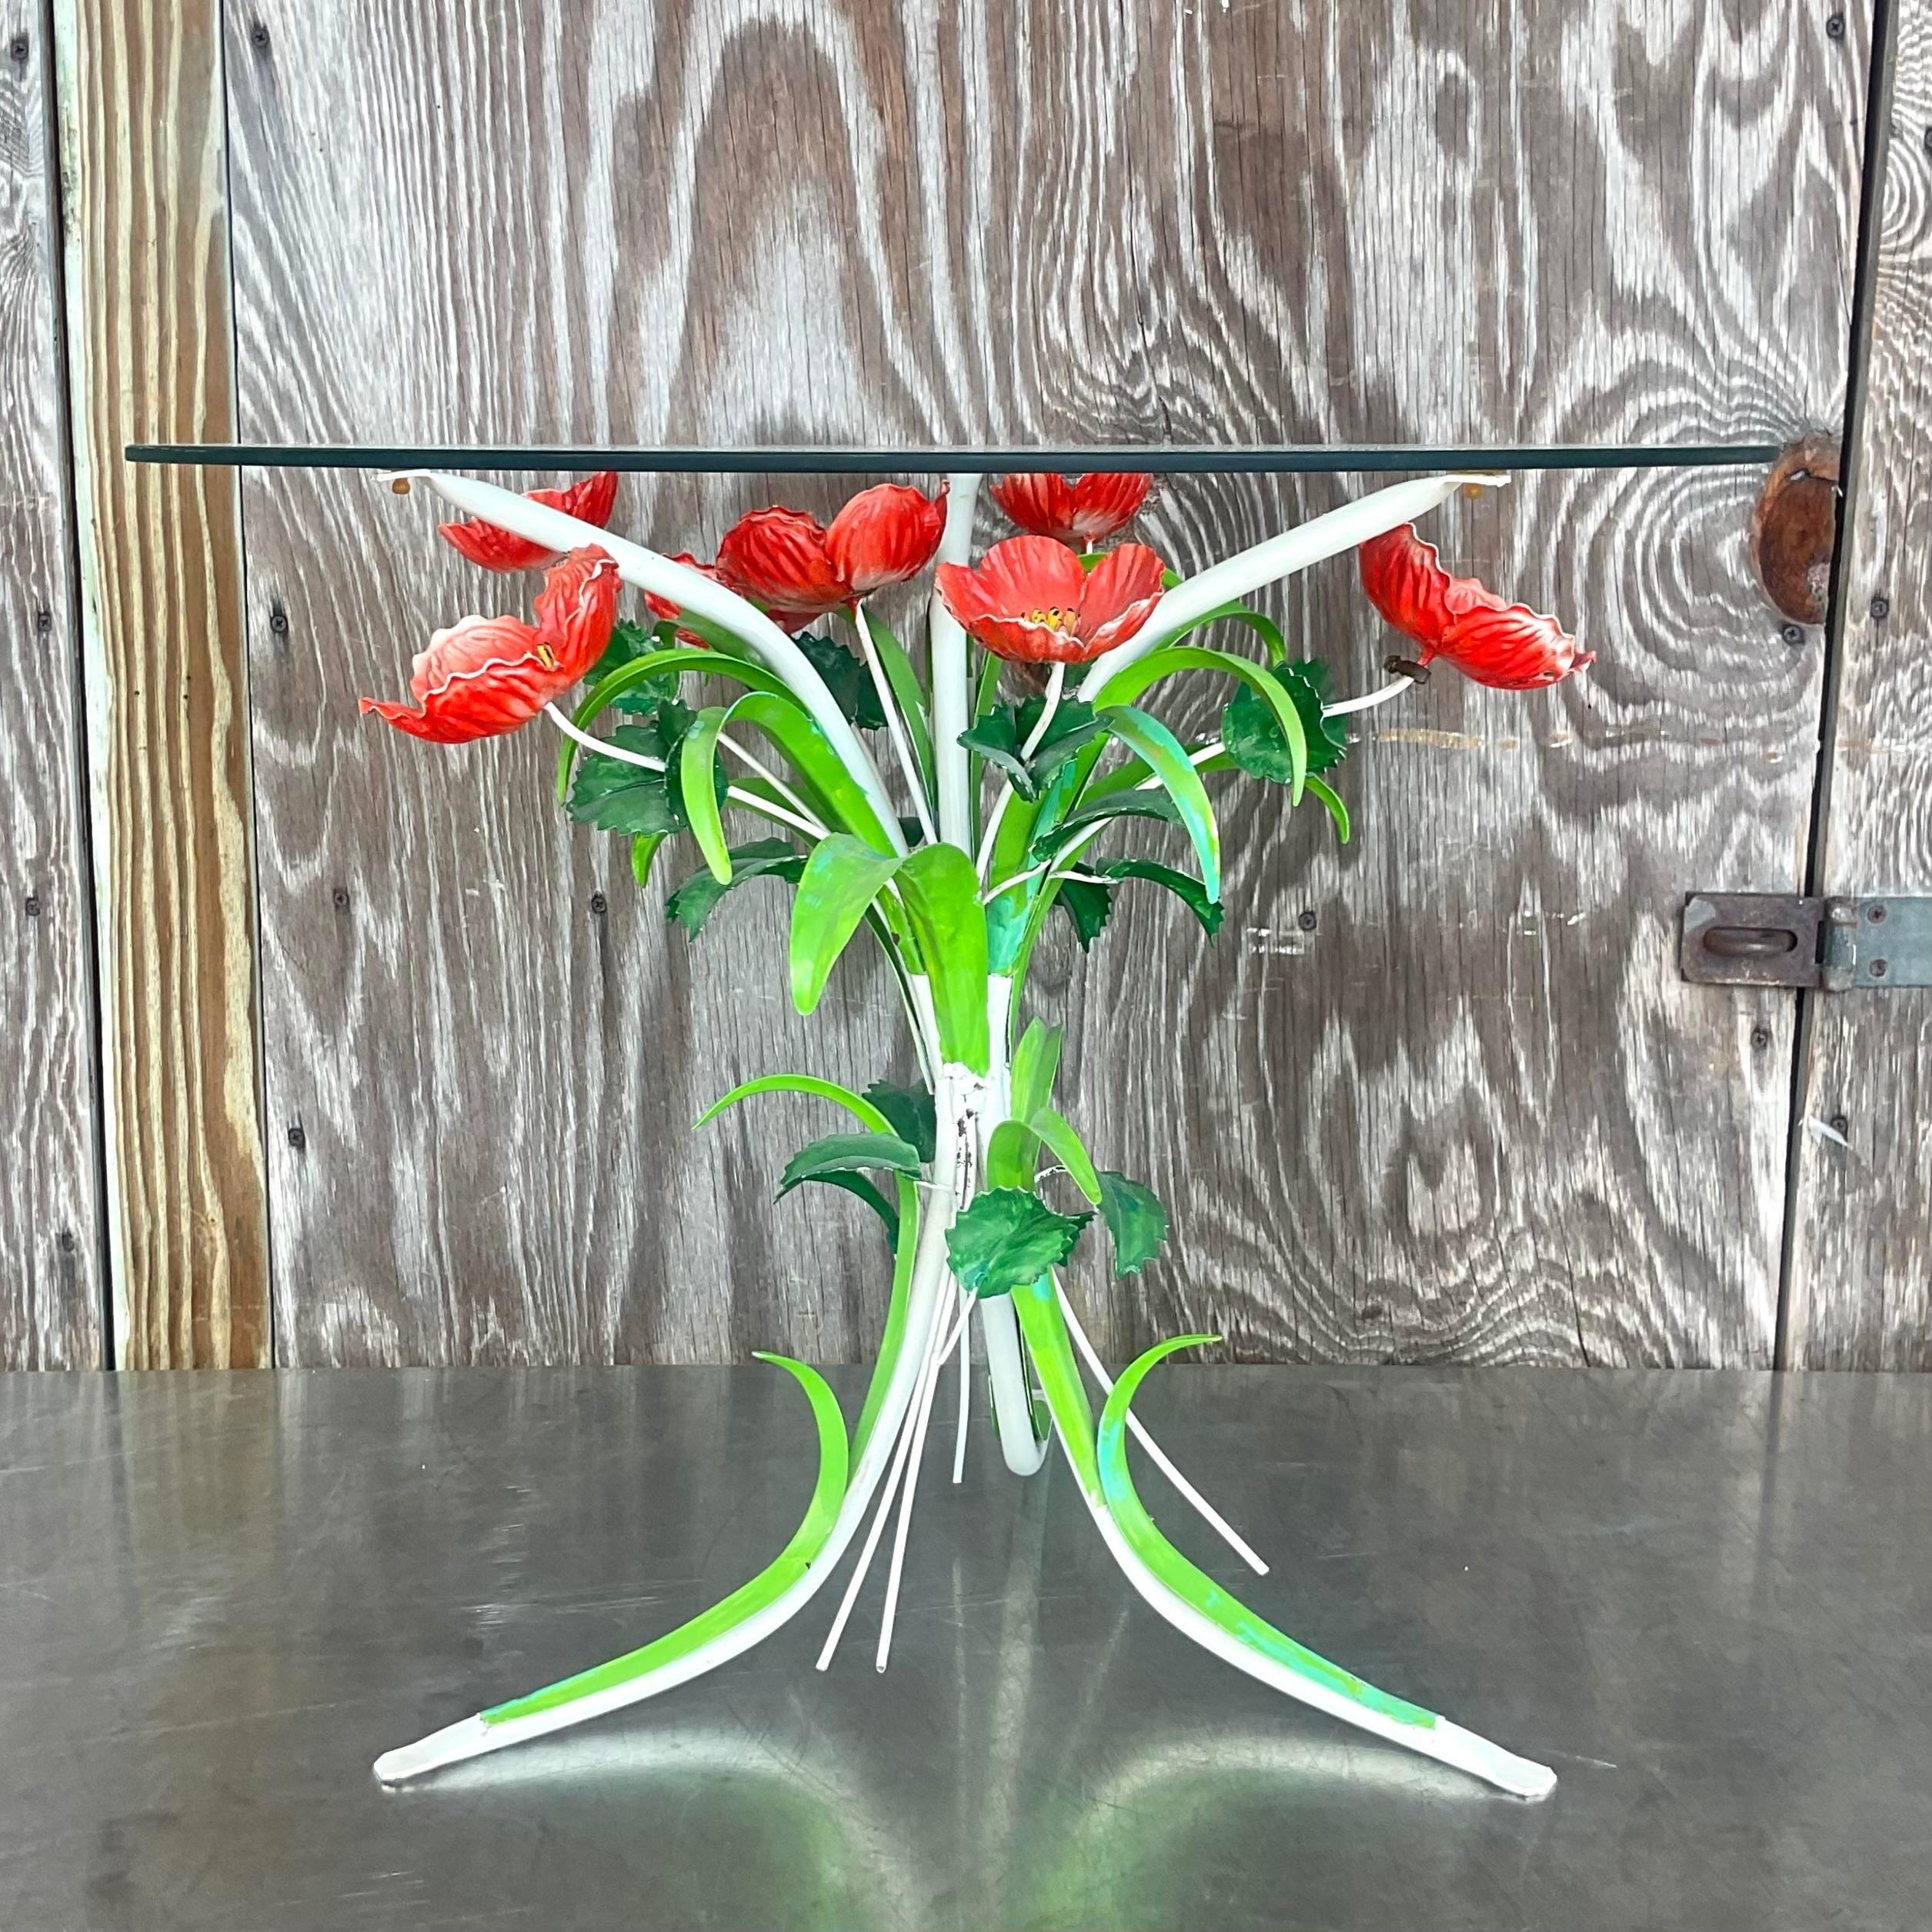 Mid 20th Century Vintage Boho Italian Hand Painted Metal Poppy Side Table In Good Condition For Sale In west palm beach, FL